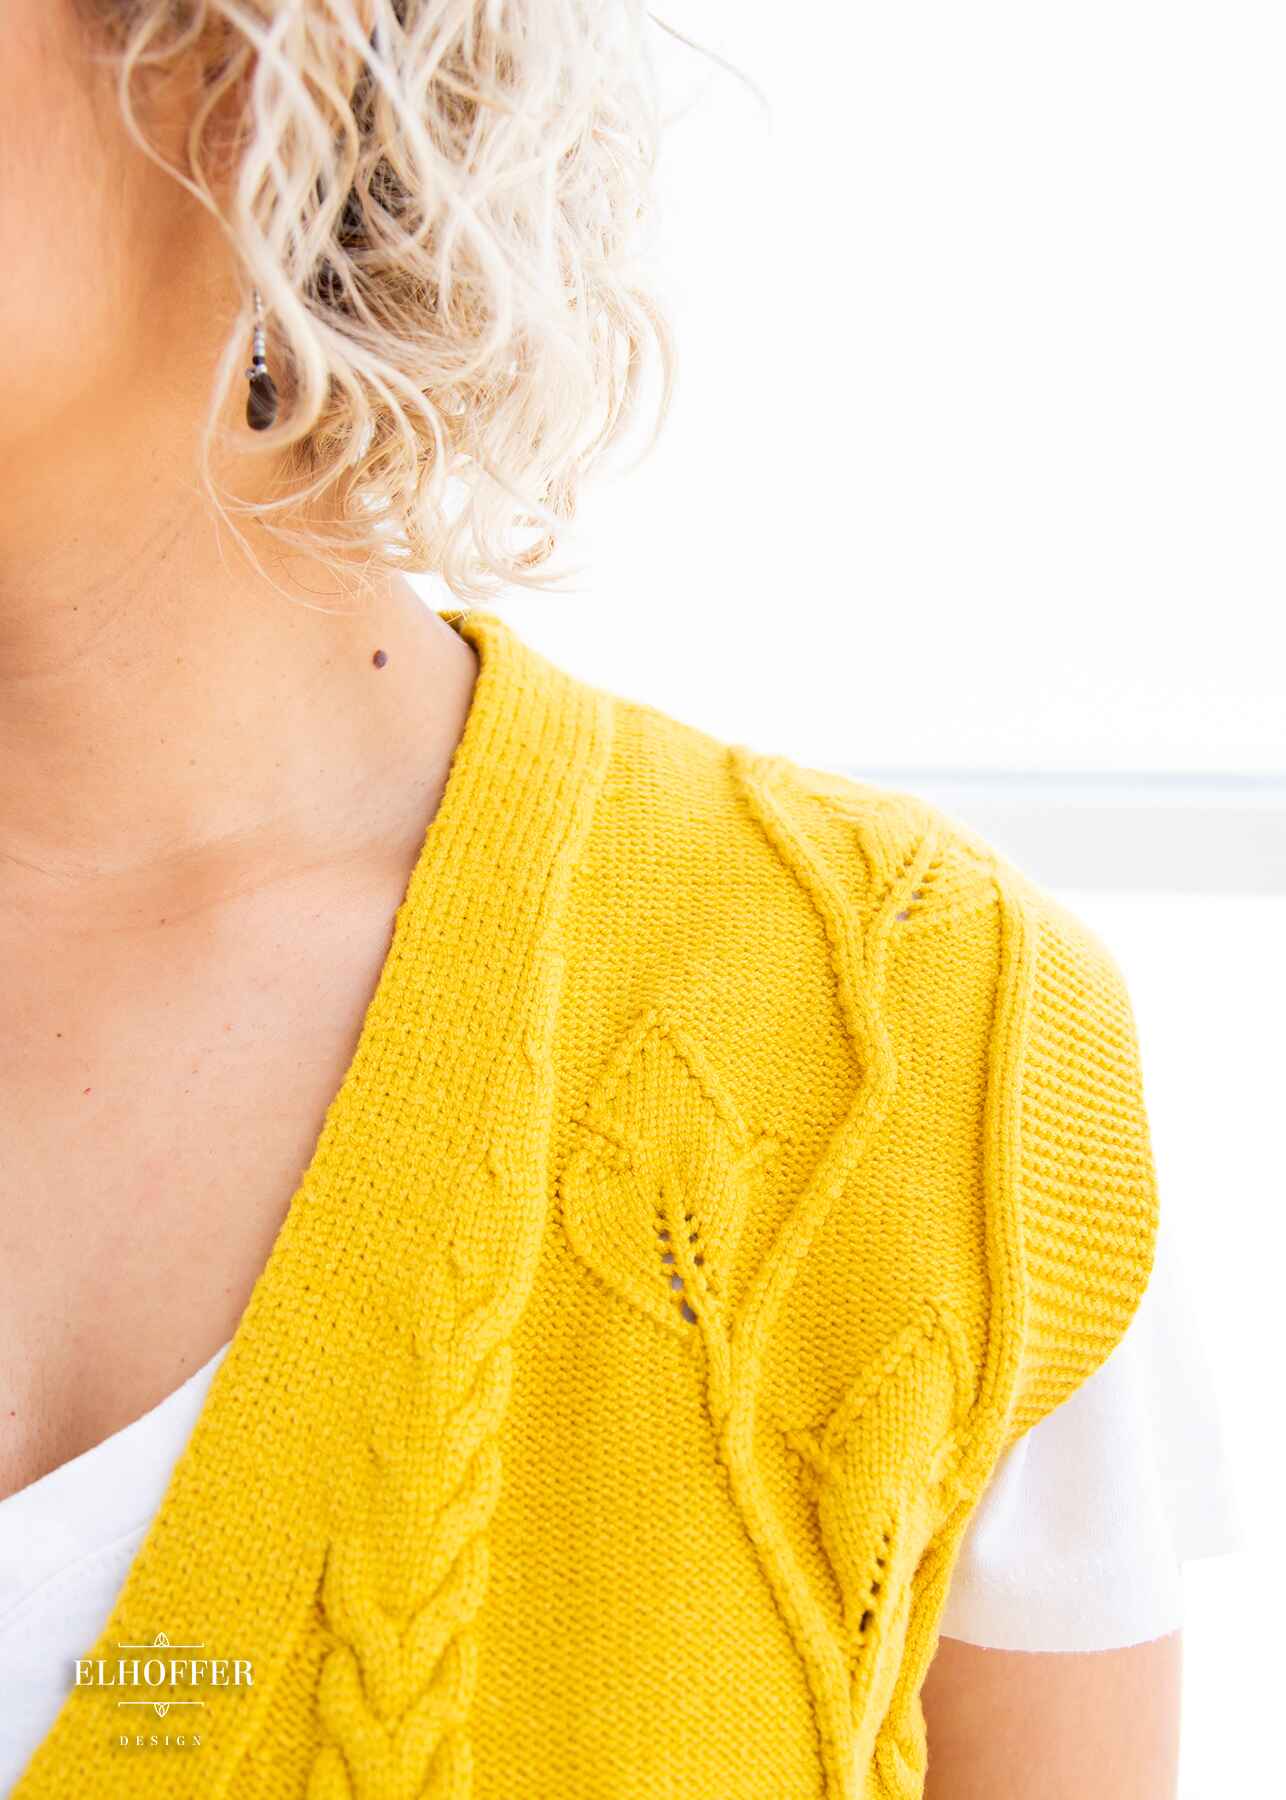  A close up of the leafy vine and cable knit pattern in the vest